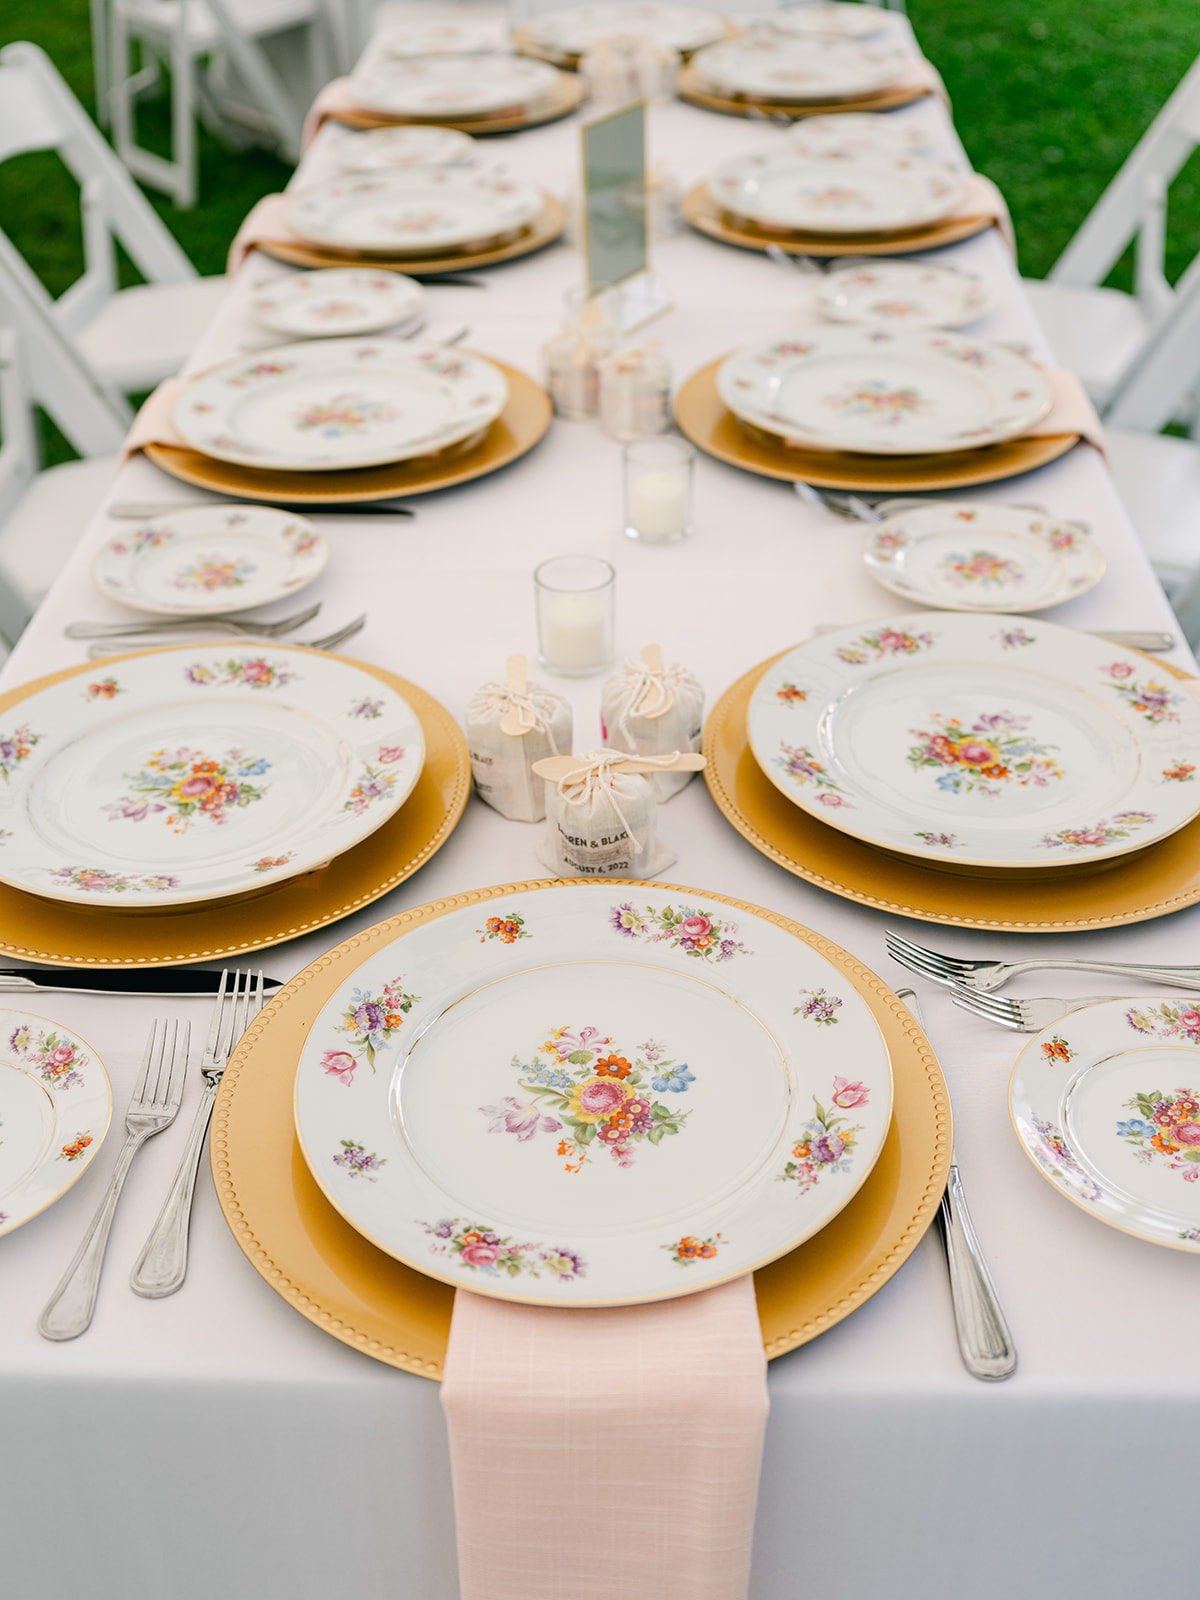 Mismatched China for garden Wedding